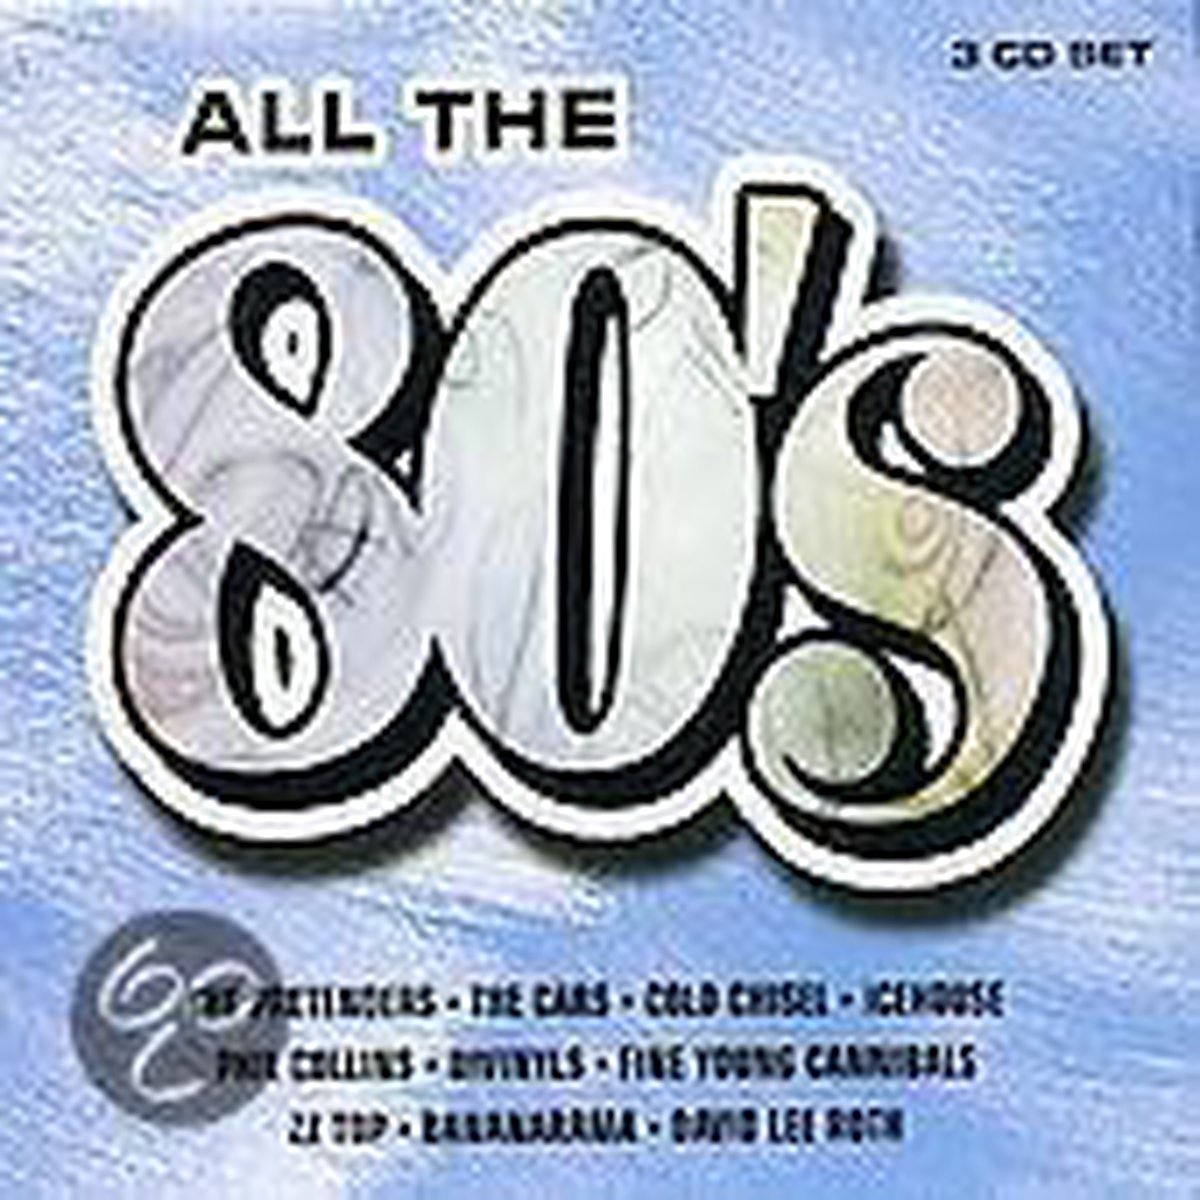 All The 80's - various artists